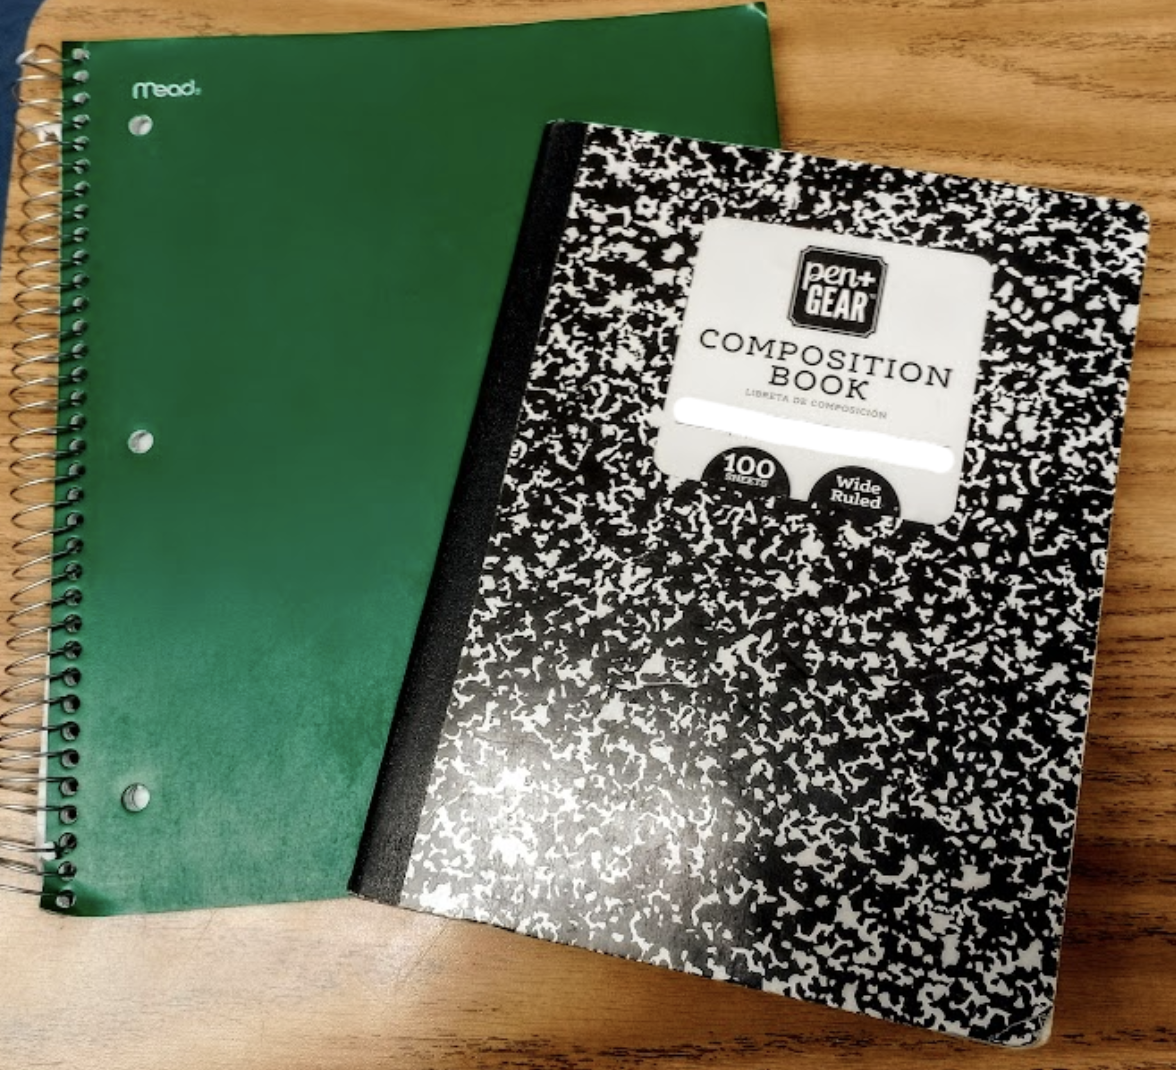 What are the correct notebook colors?